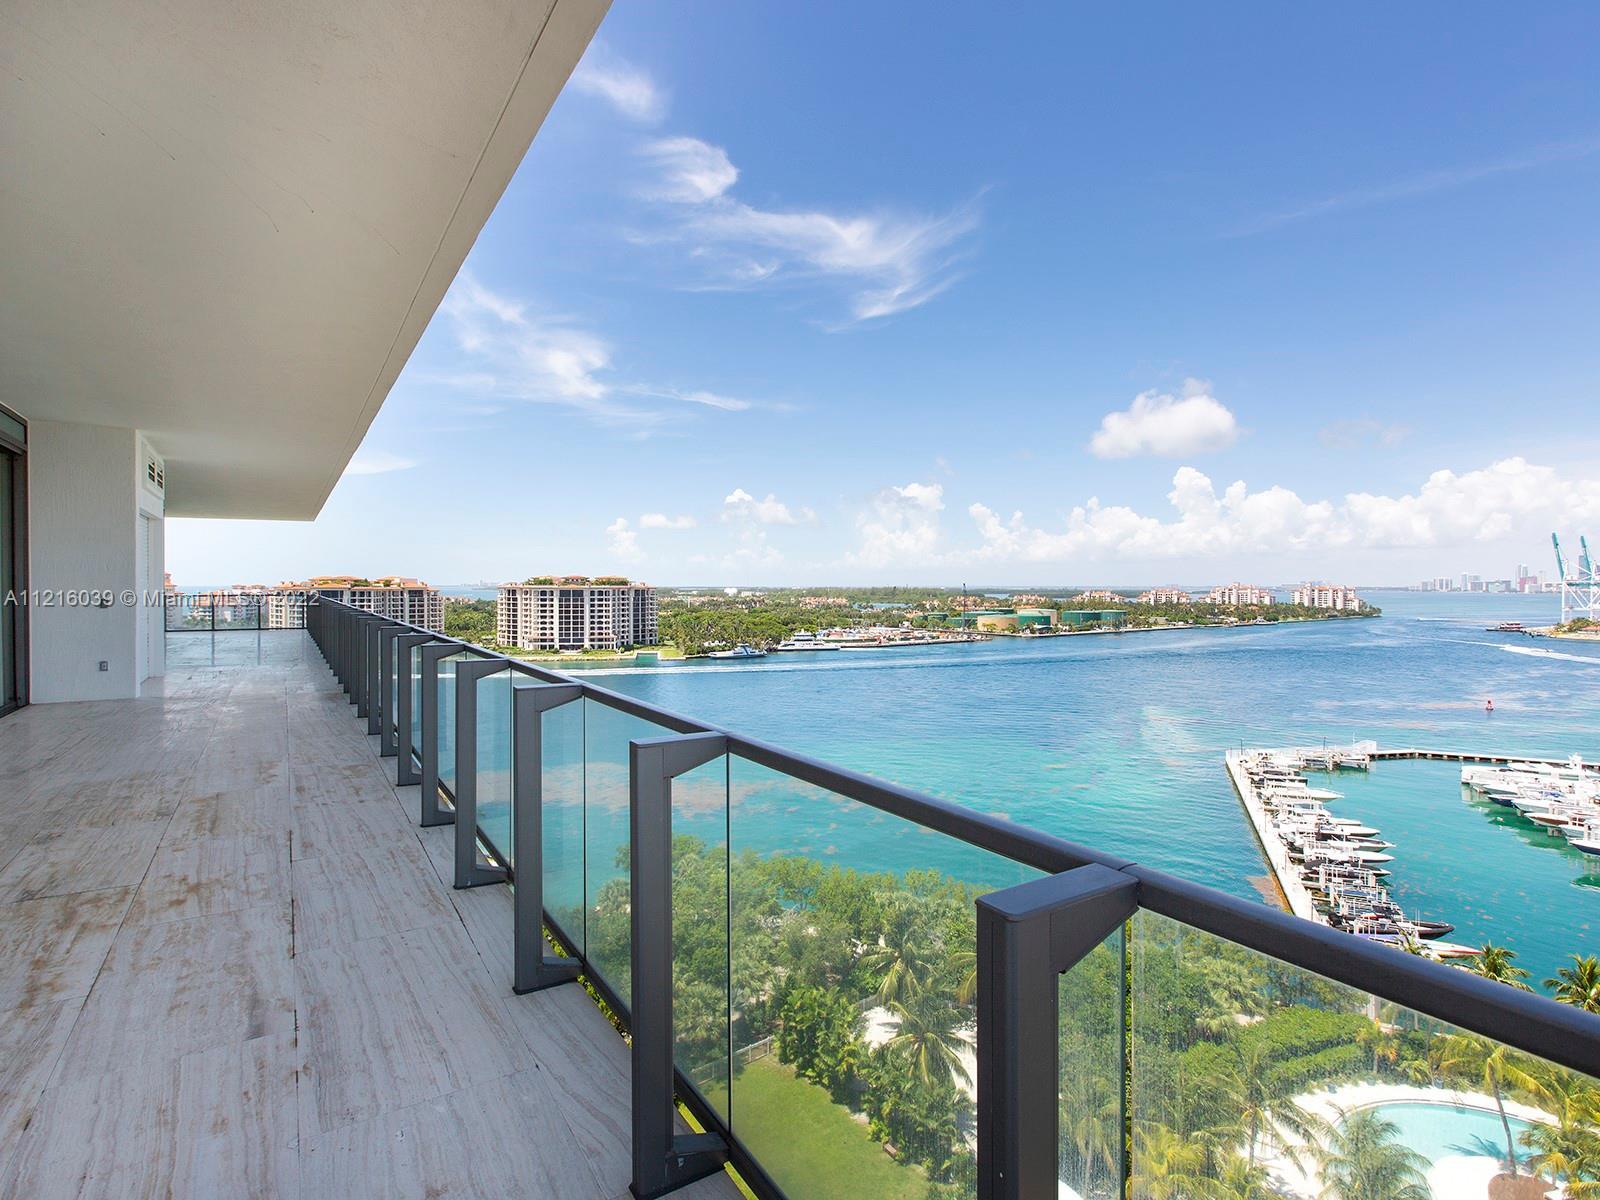 Located at the very southern tip of South Beach, this stunning residence offers exclusivity and priv